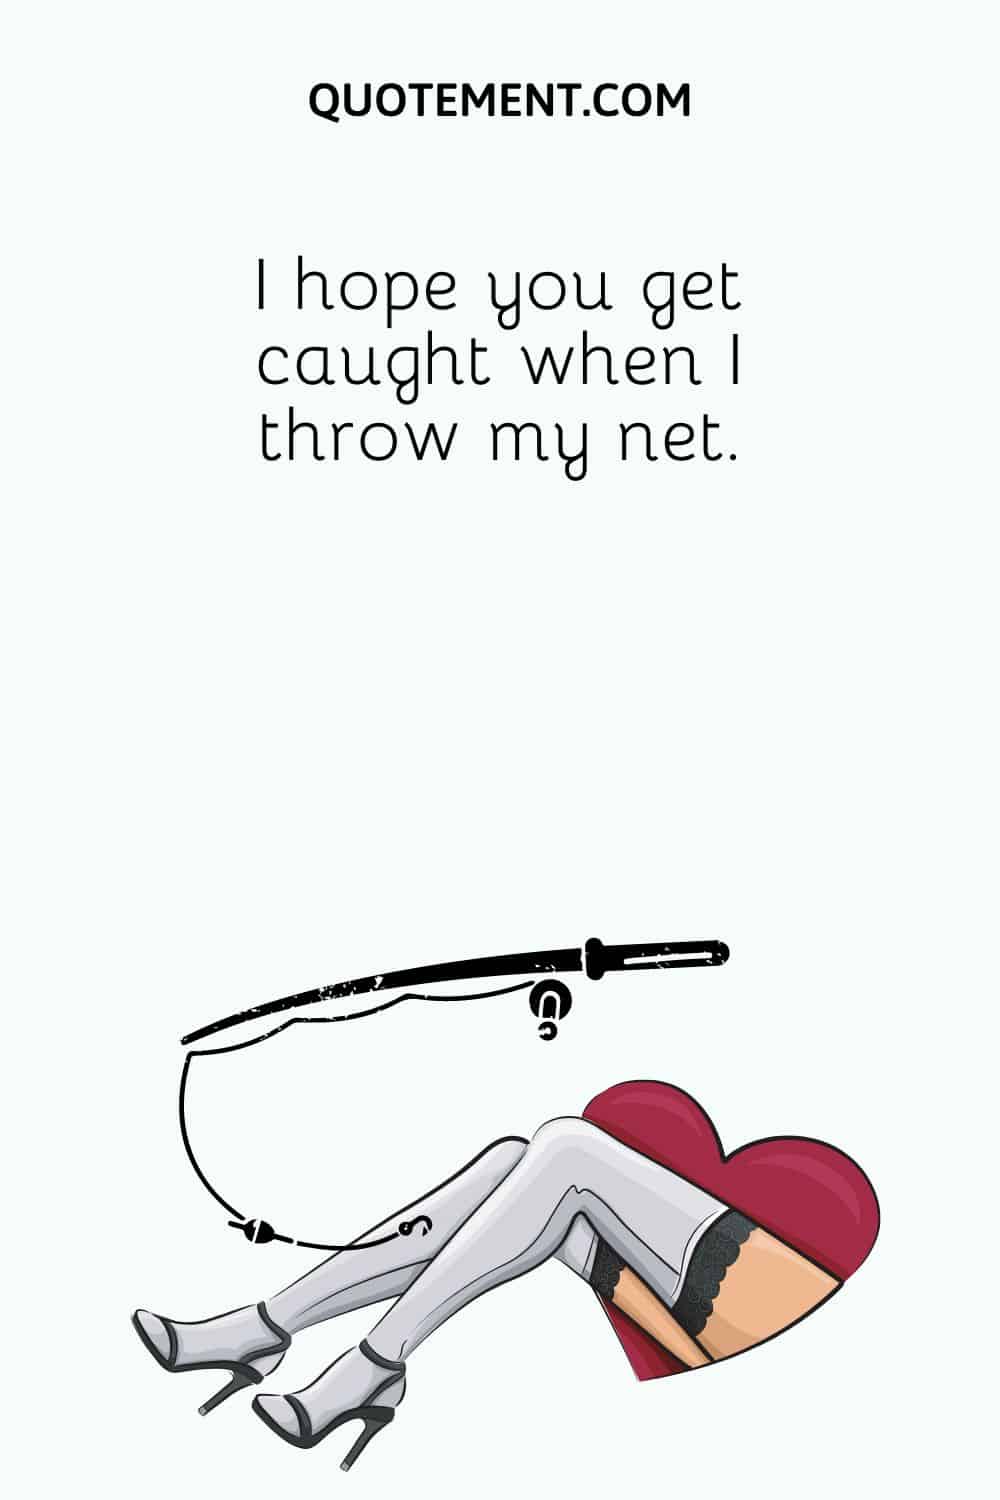 I hope you get caught when I throw my net